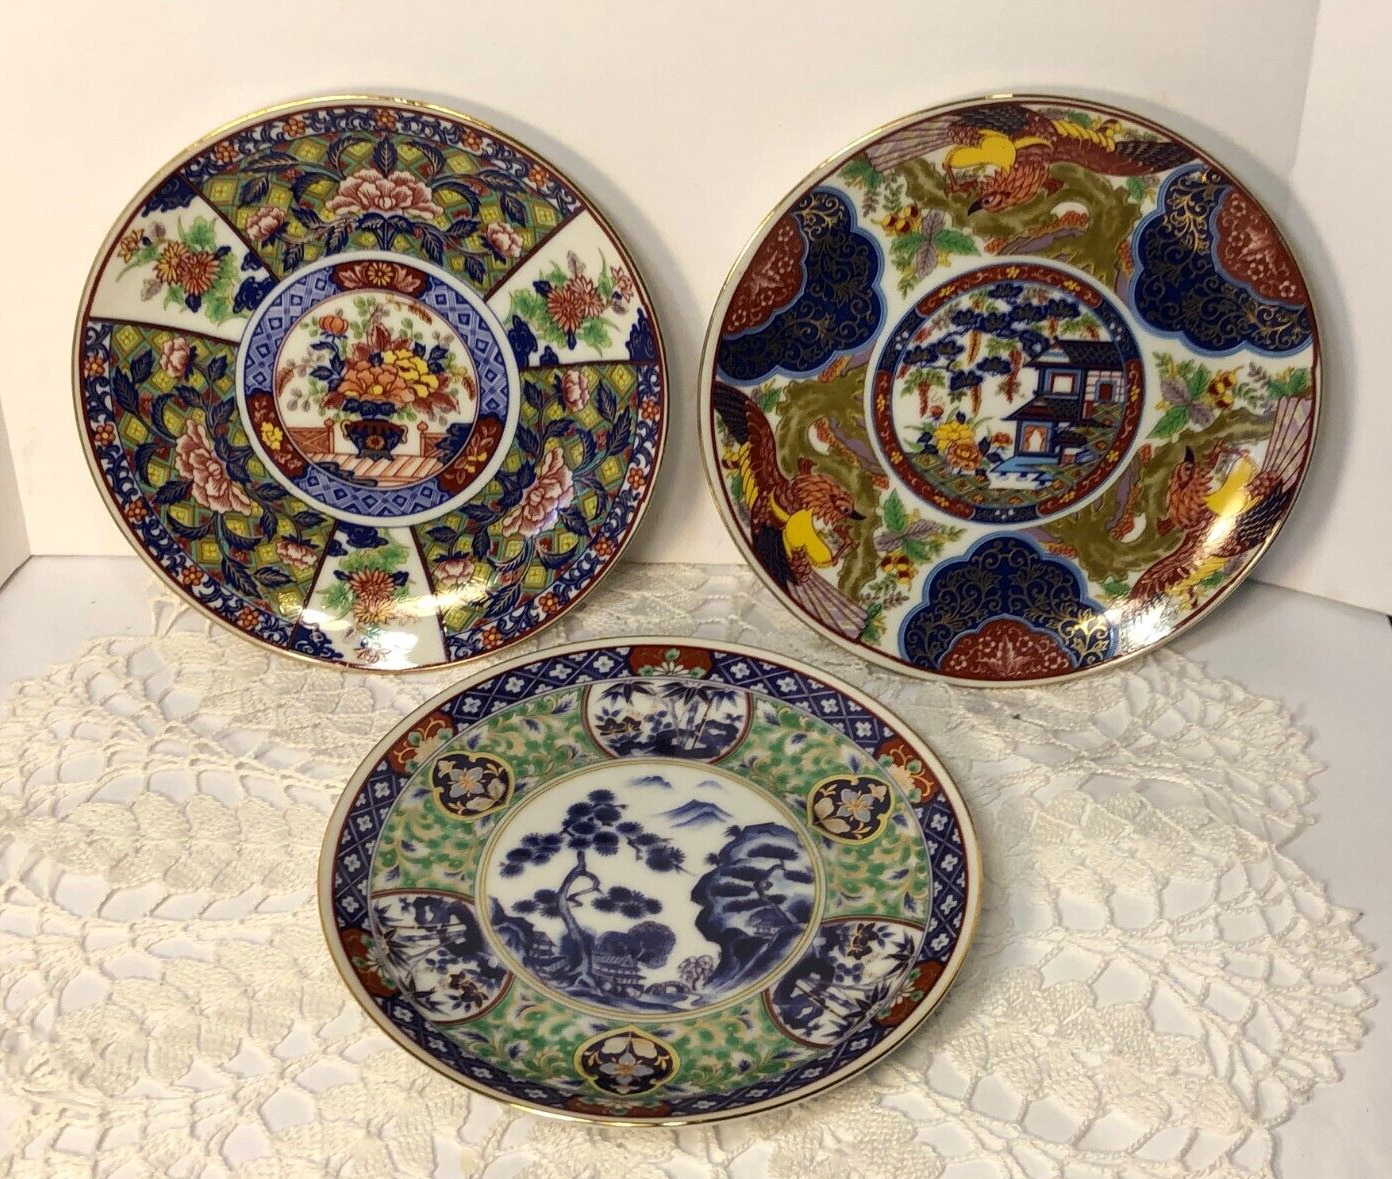 3 Vintage Imari Ware Japan Plates Wall Plaque Made In Japan Porcelain COLORFUL